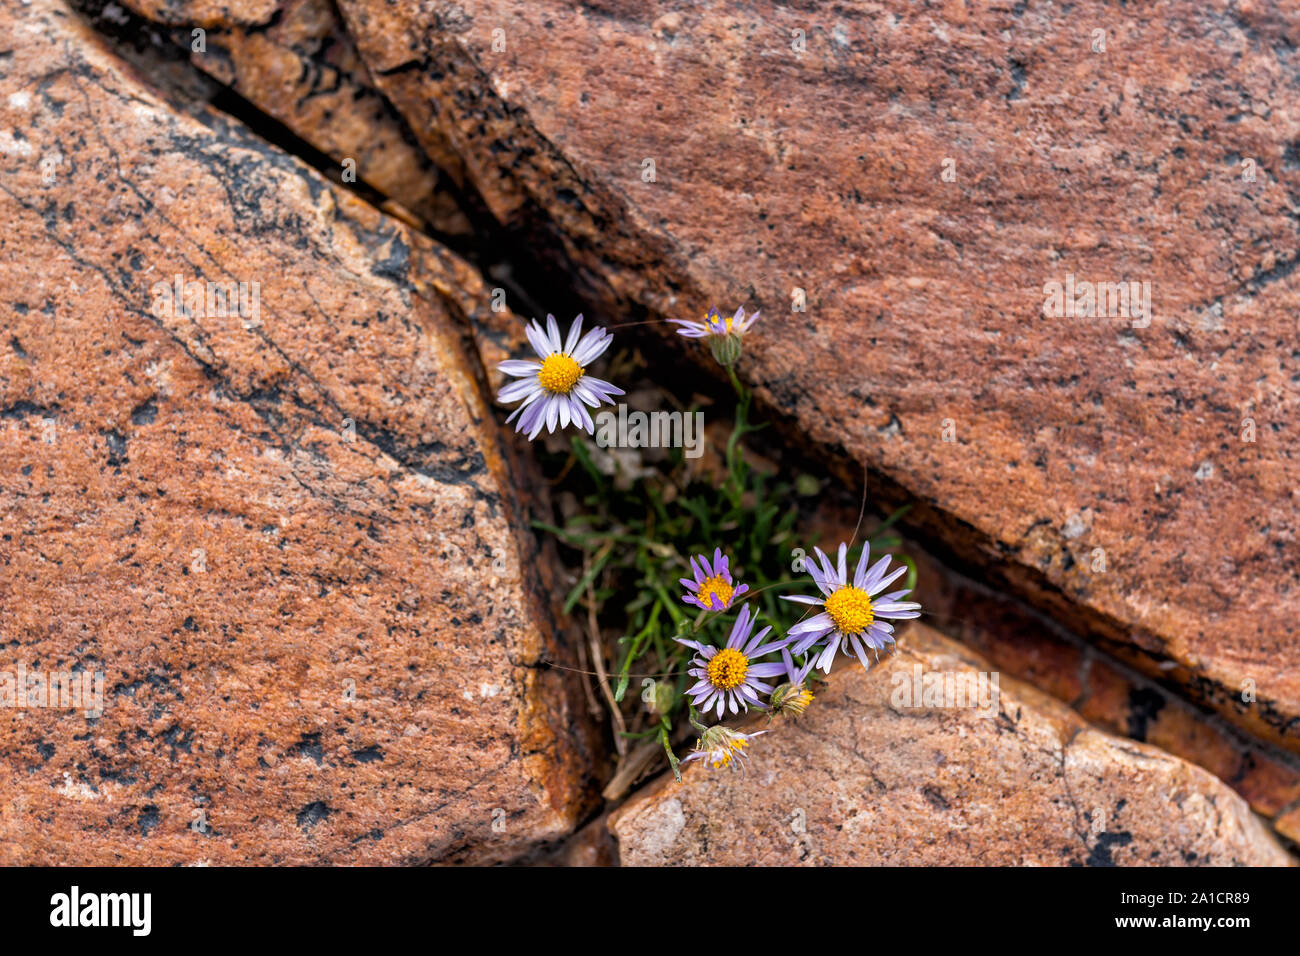 Albion Basin, Utah summer with small yellow purple alpine daisy flowers growing on rocky trail in Wasatch mountains near Cecret Lake Stock Photo